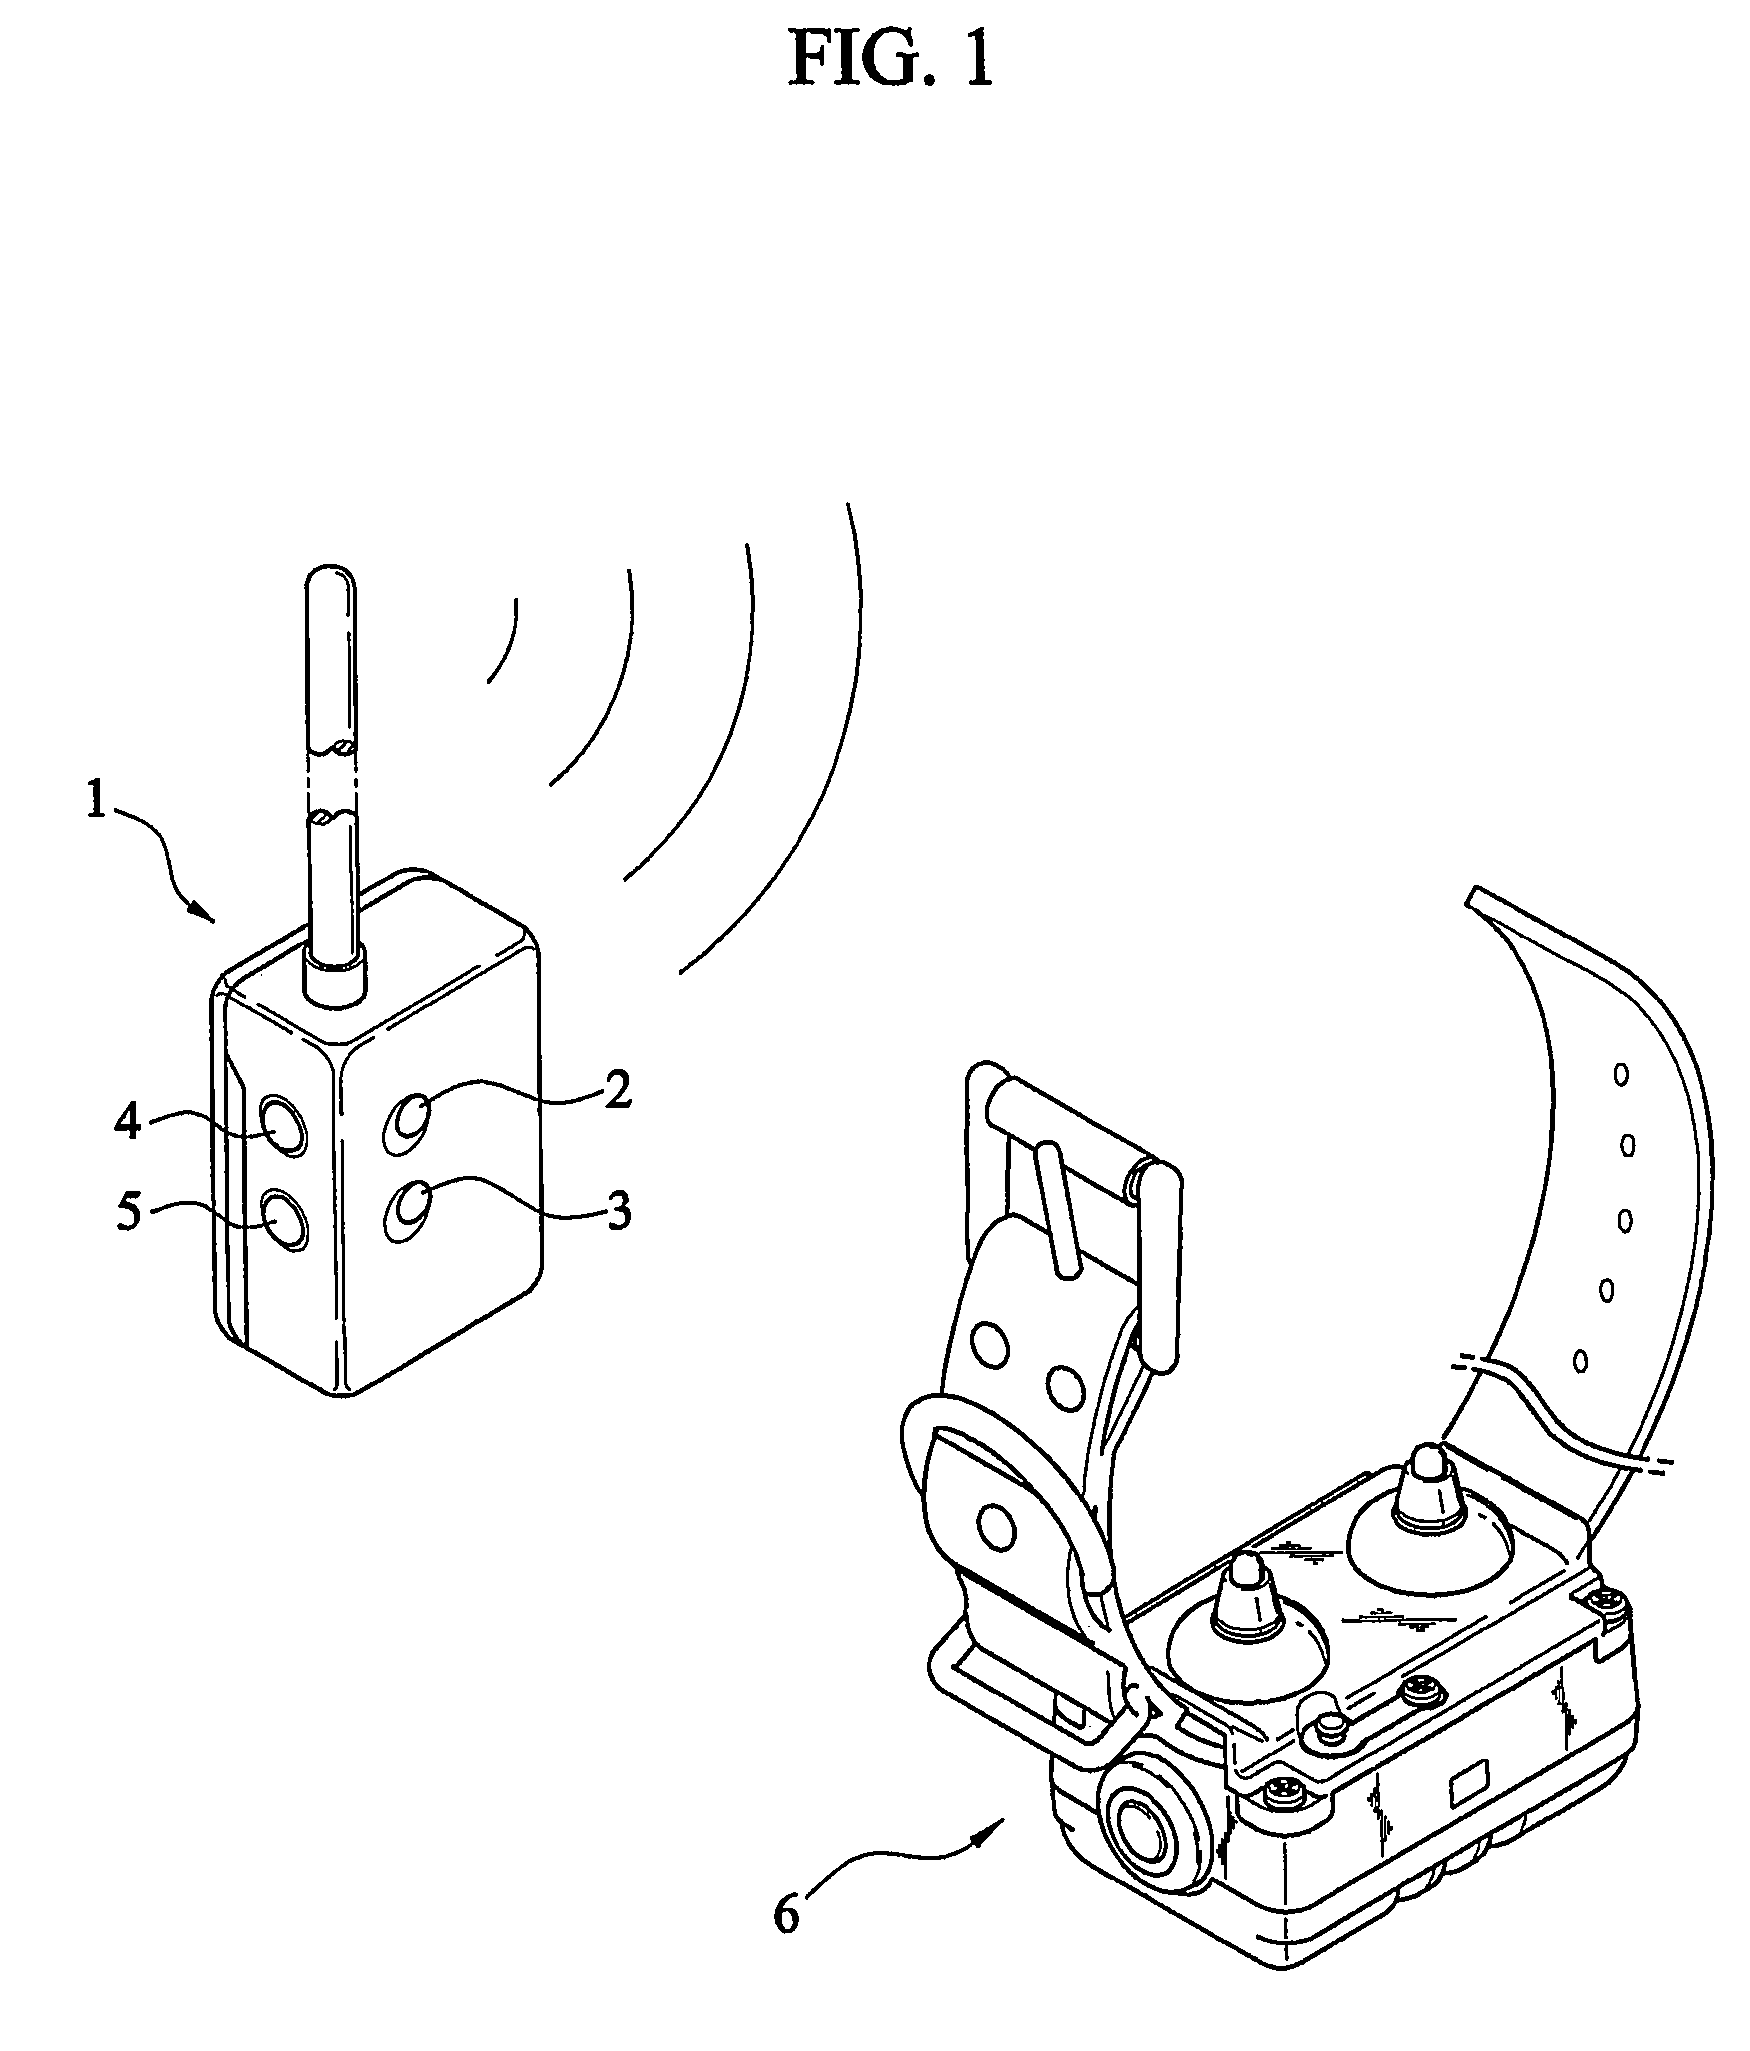 Vibration touch button-type animal training device and method of controlling the same